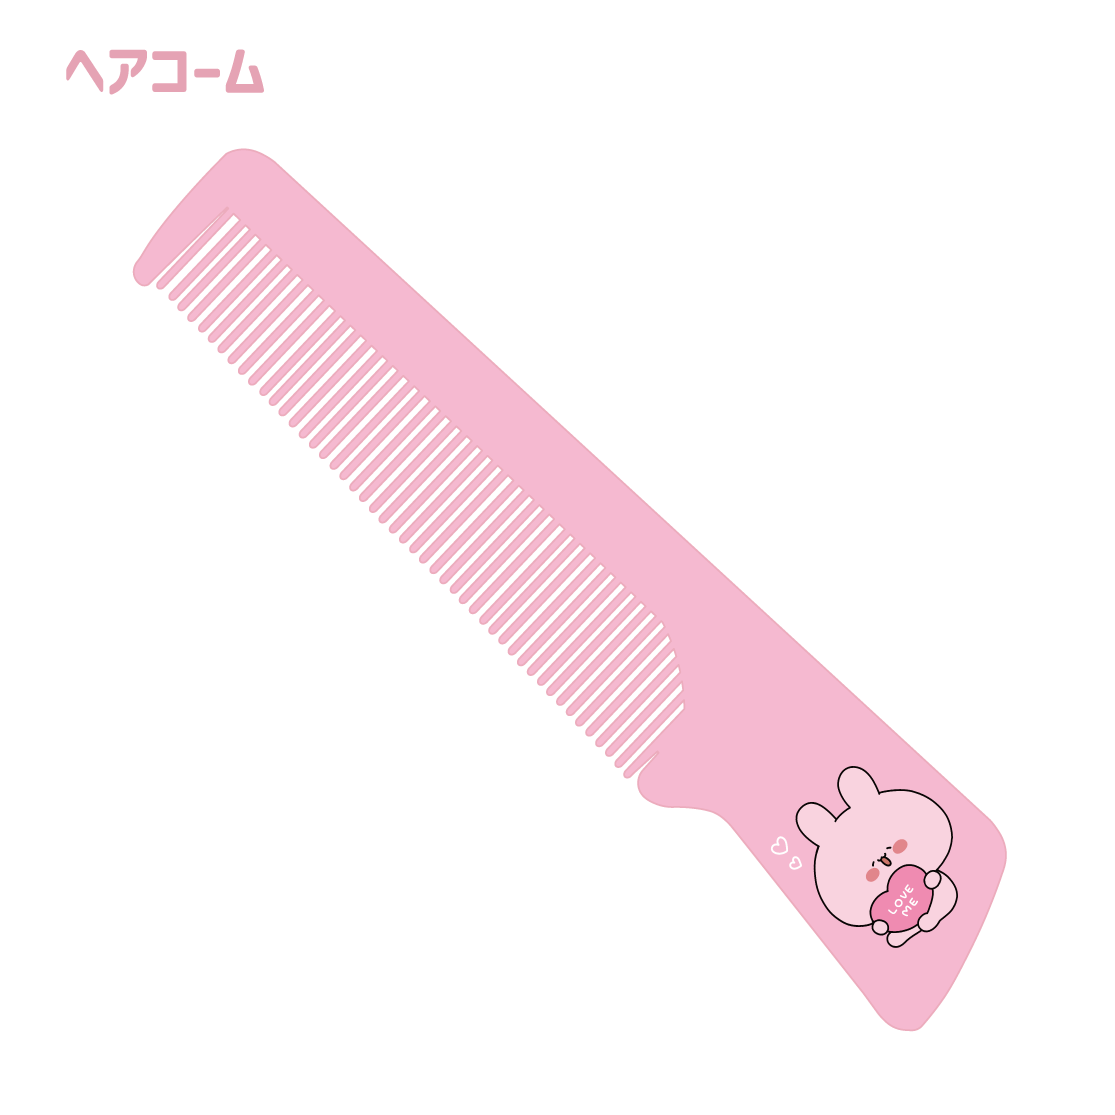 [Asamimi-chan] Hair comb (Asamimi BASIC AUGUST) [Shipped in mid-October]